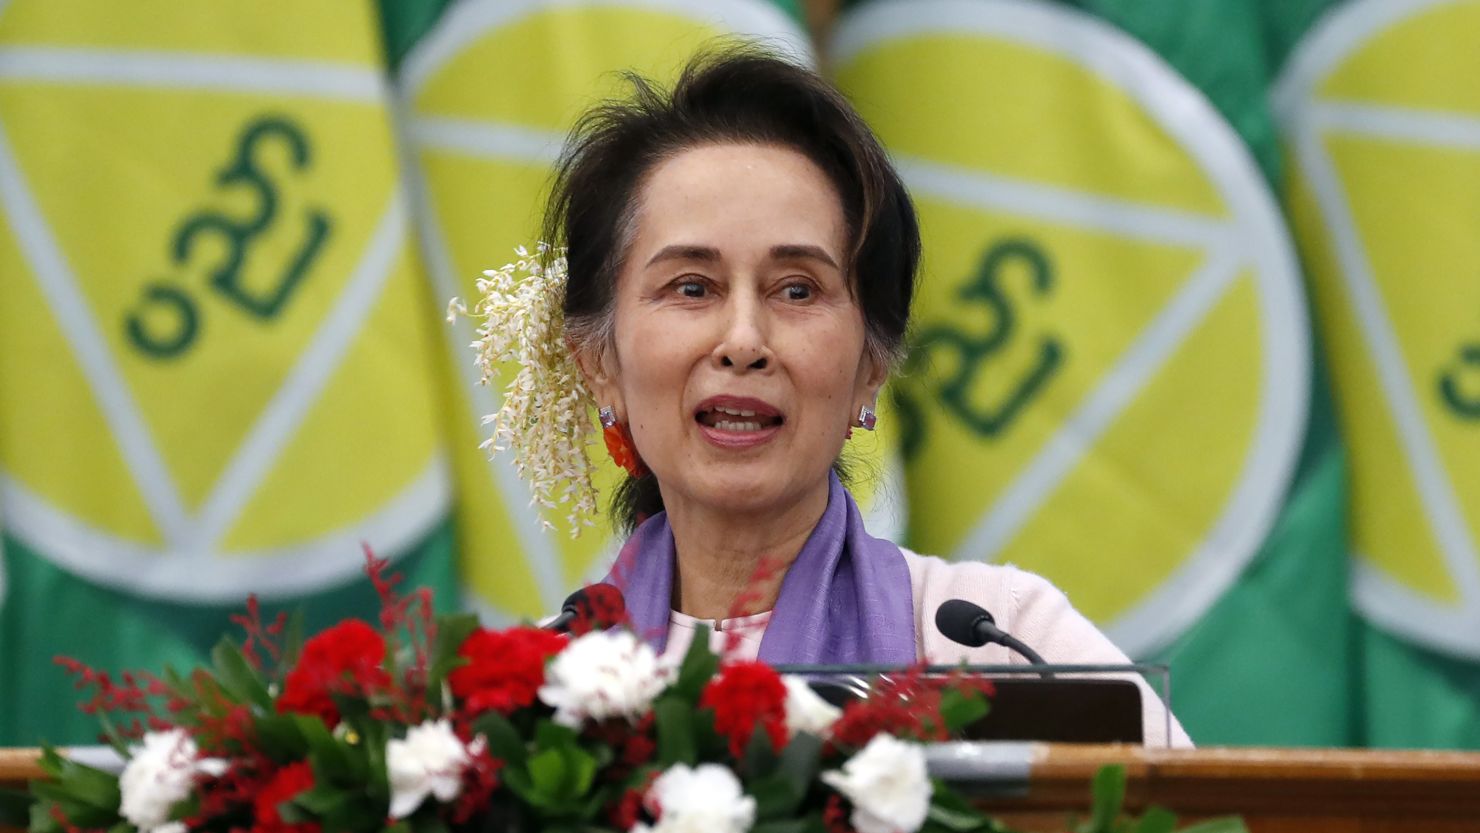 Myanmar's former de facto leader Aung San Suu Kyi delivers a speech in Naypyidaw, Myanmar, on January 28, 2020.